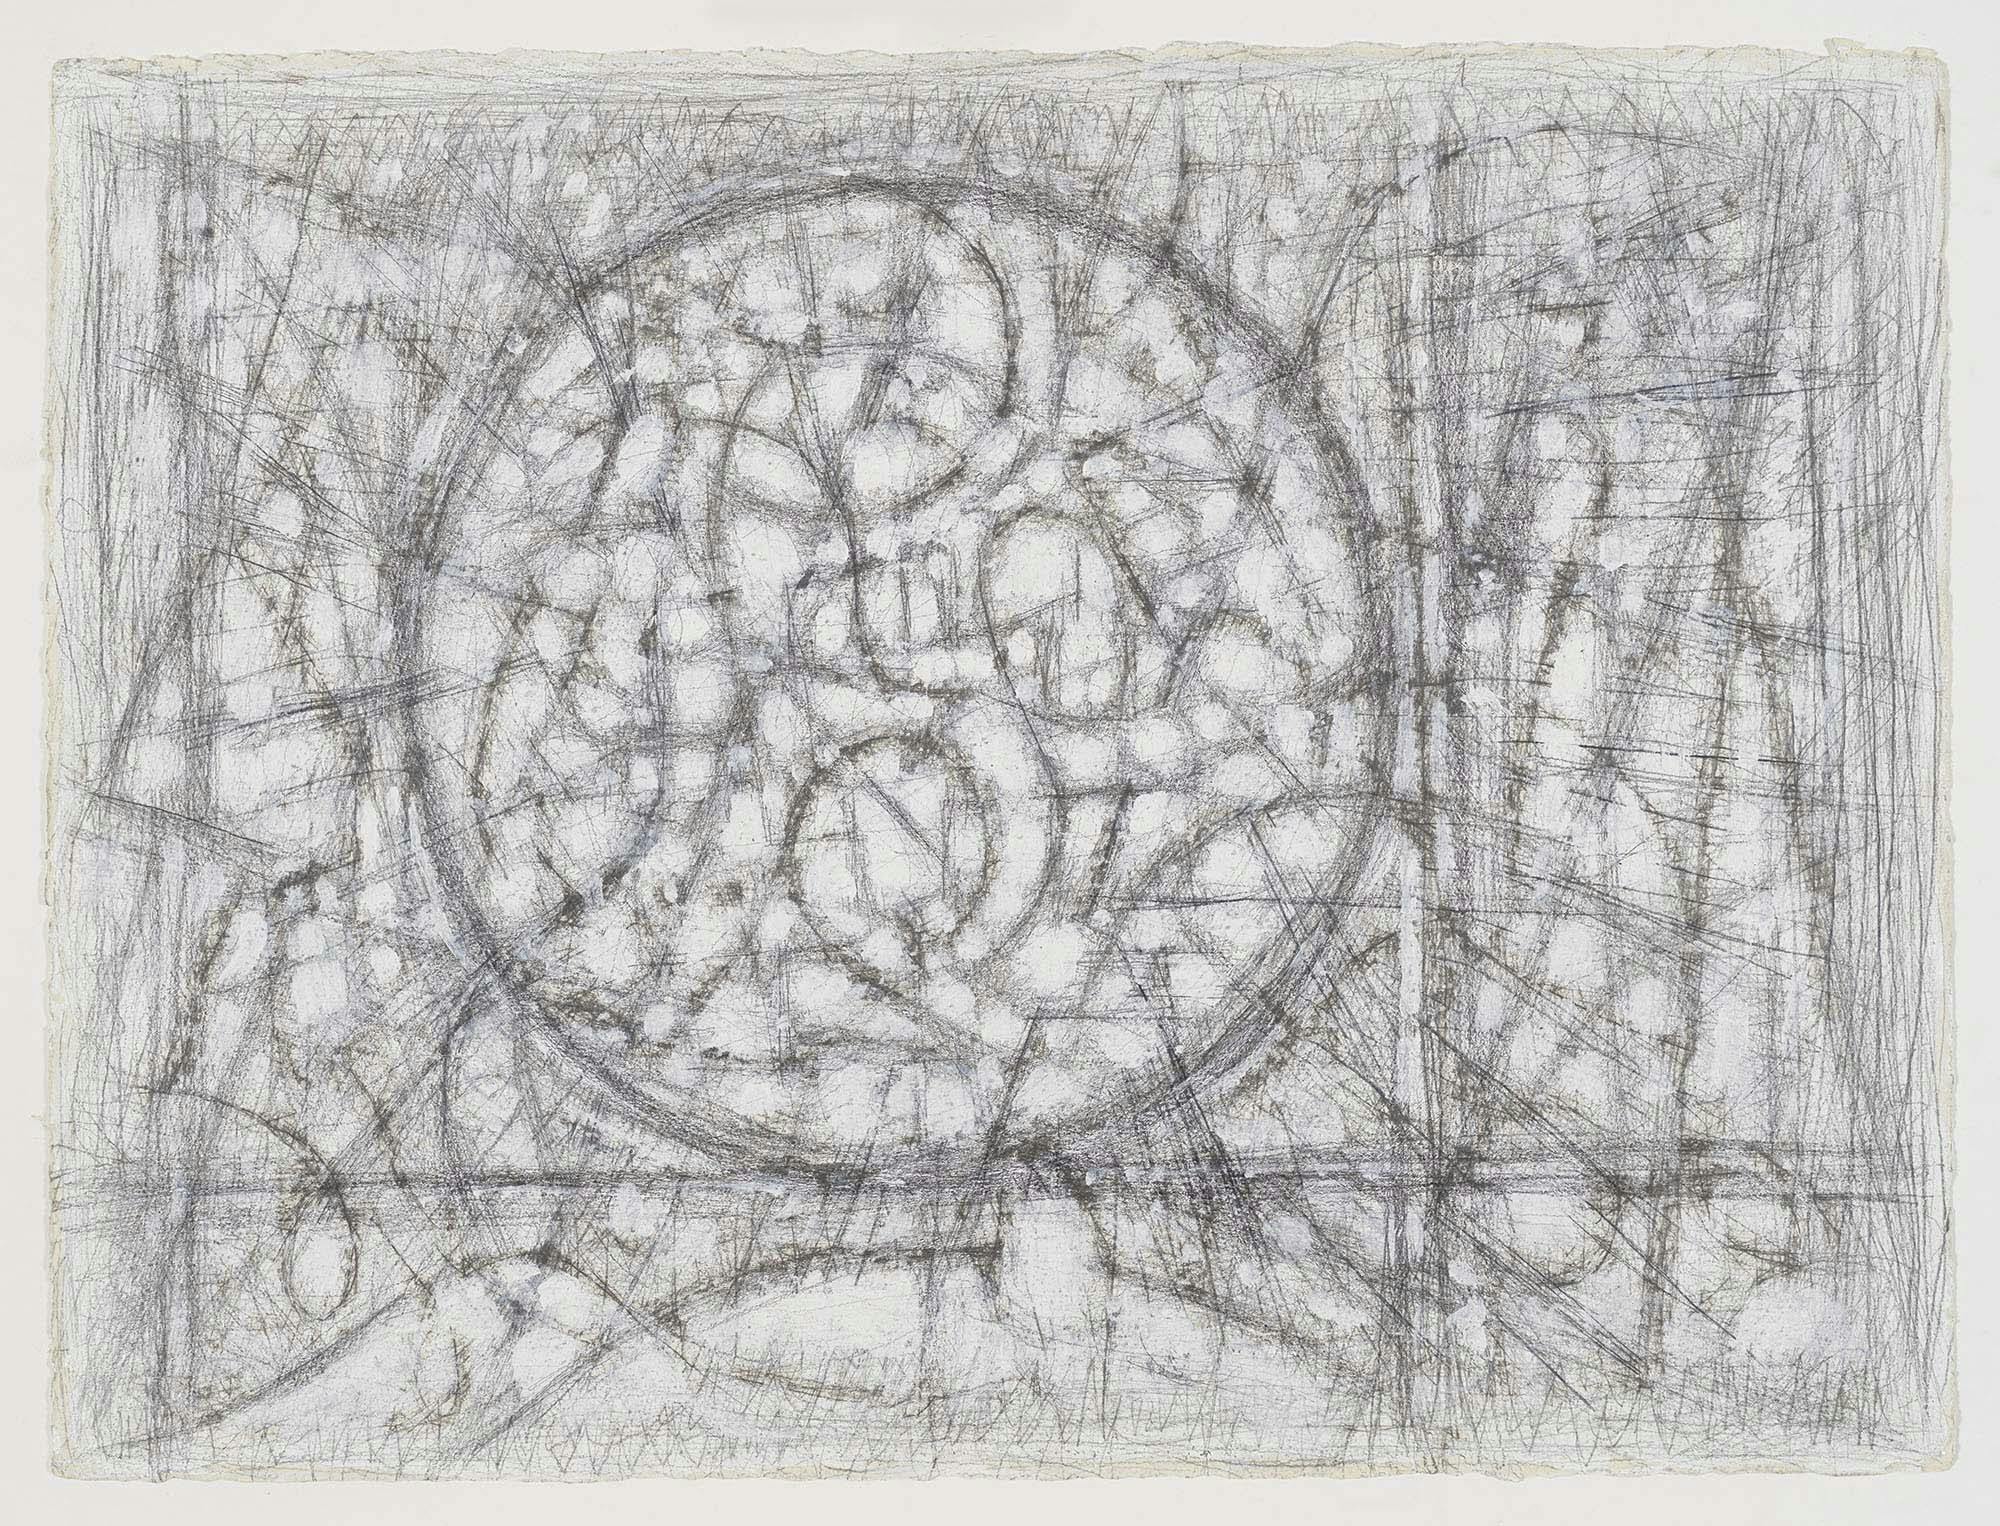 White Arabesque
1977
Graphite and gesso on paper
22 1/2 x 30 in. (57.2 x 76.2 cm)
 – The Richard Pousette-Dart Foundation